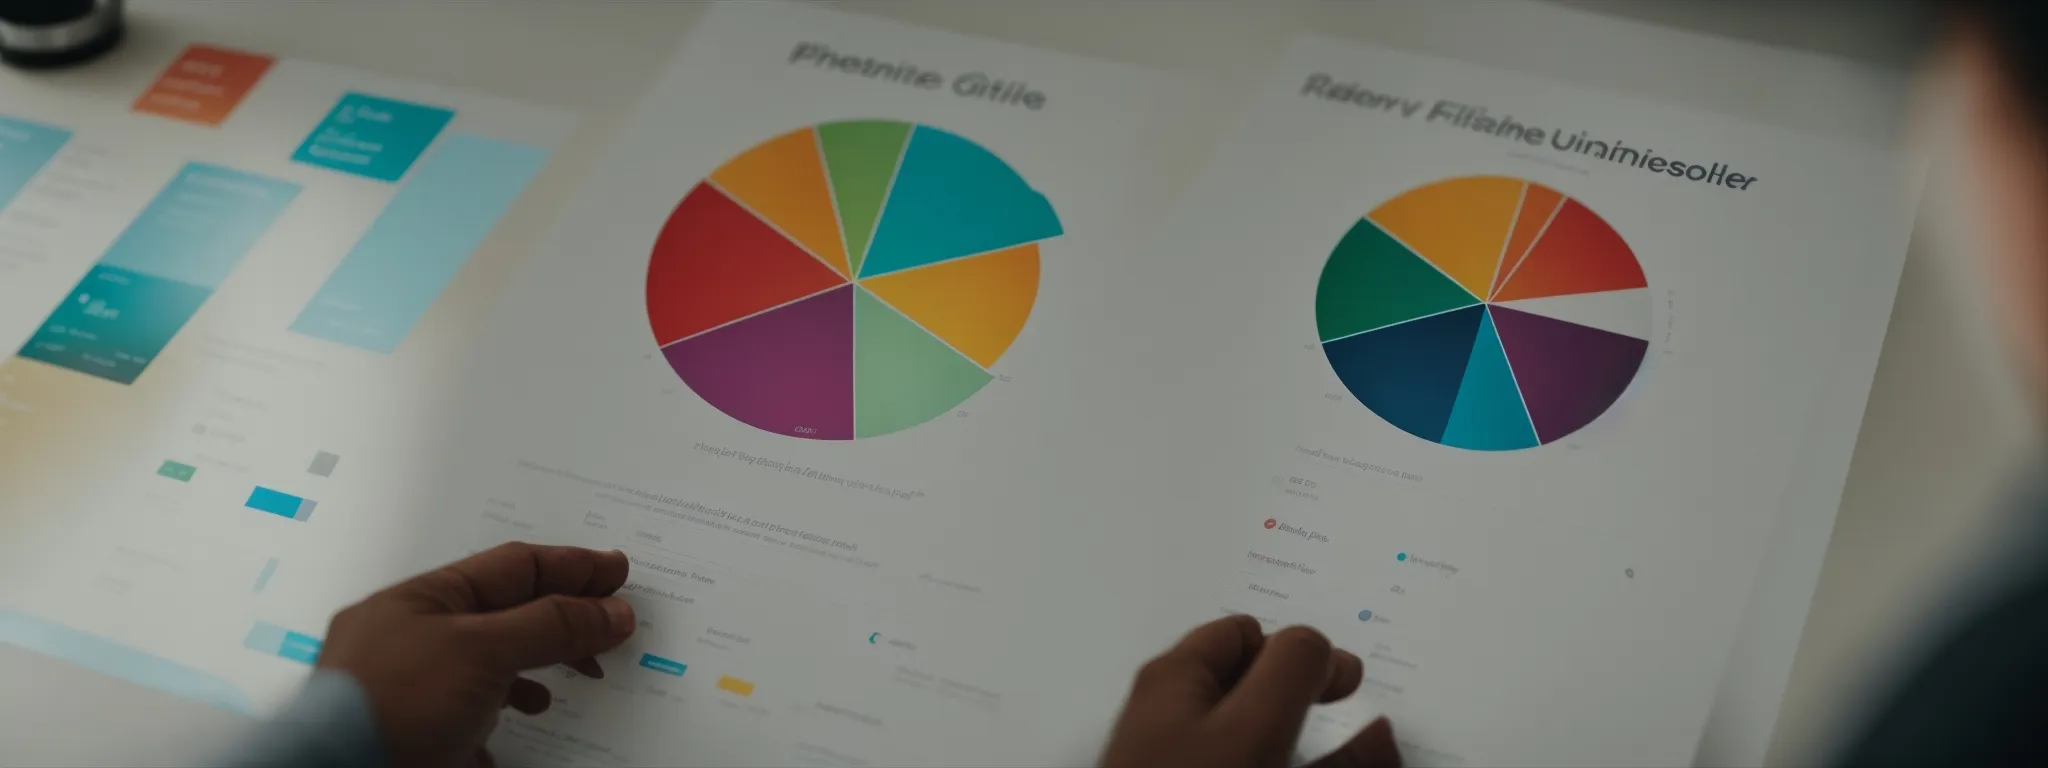 a marketer analyzes a colorful pie chart to optimize a website's search engine visibility.